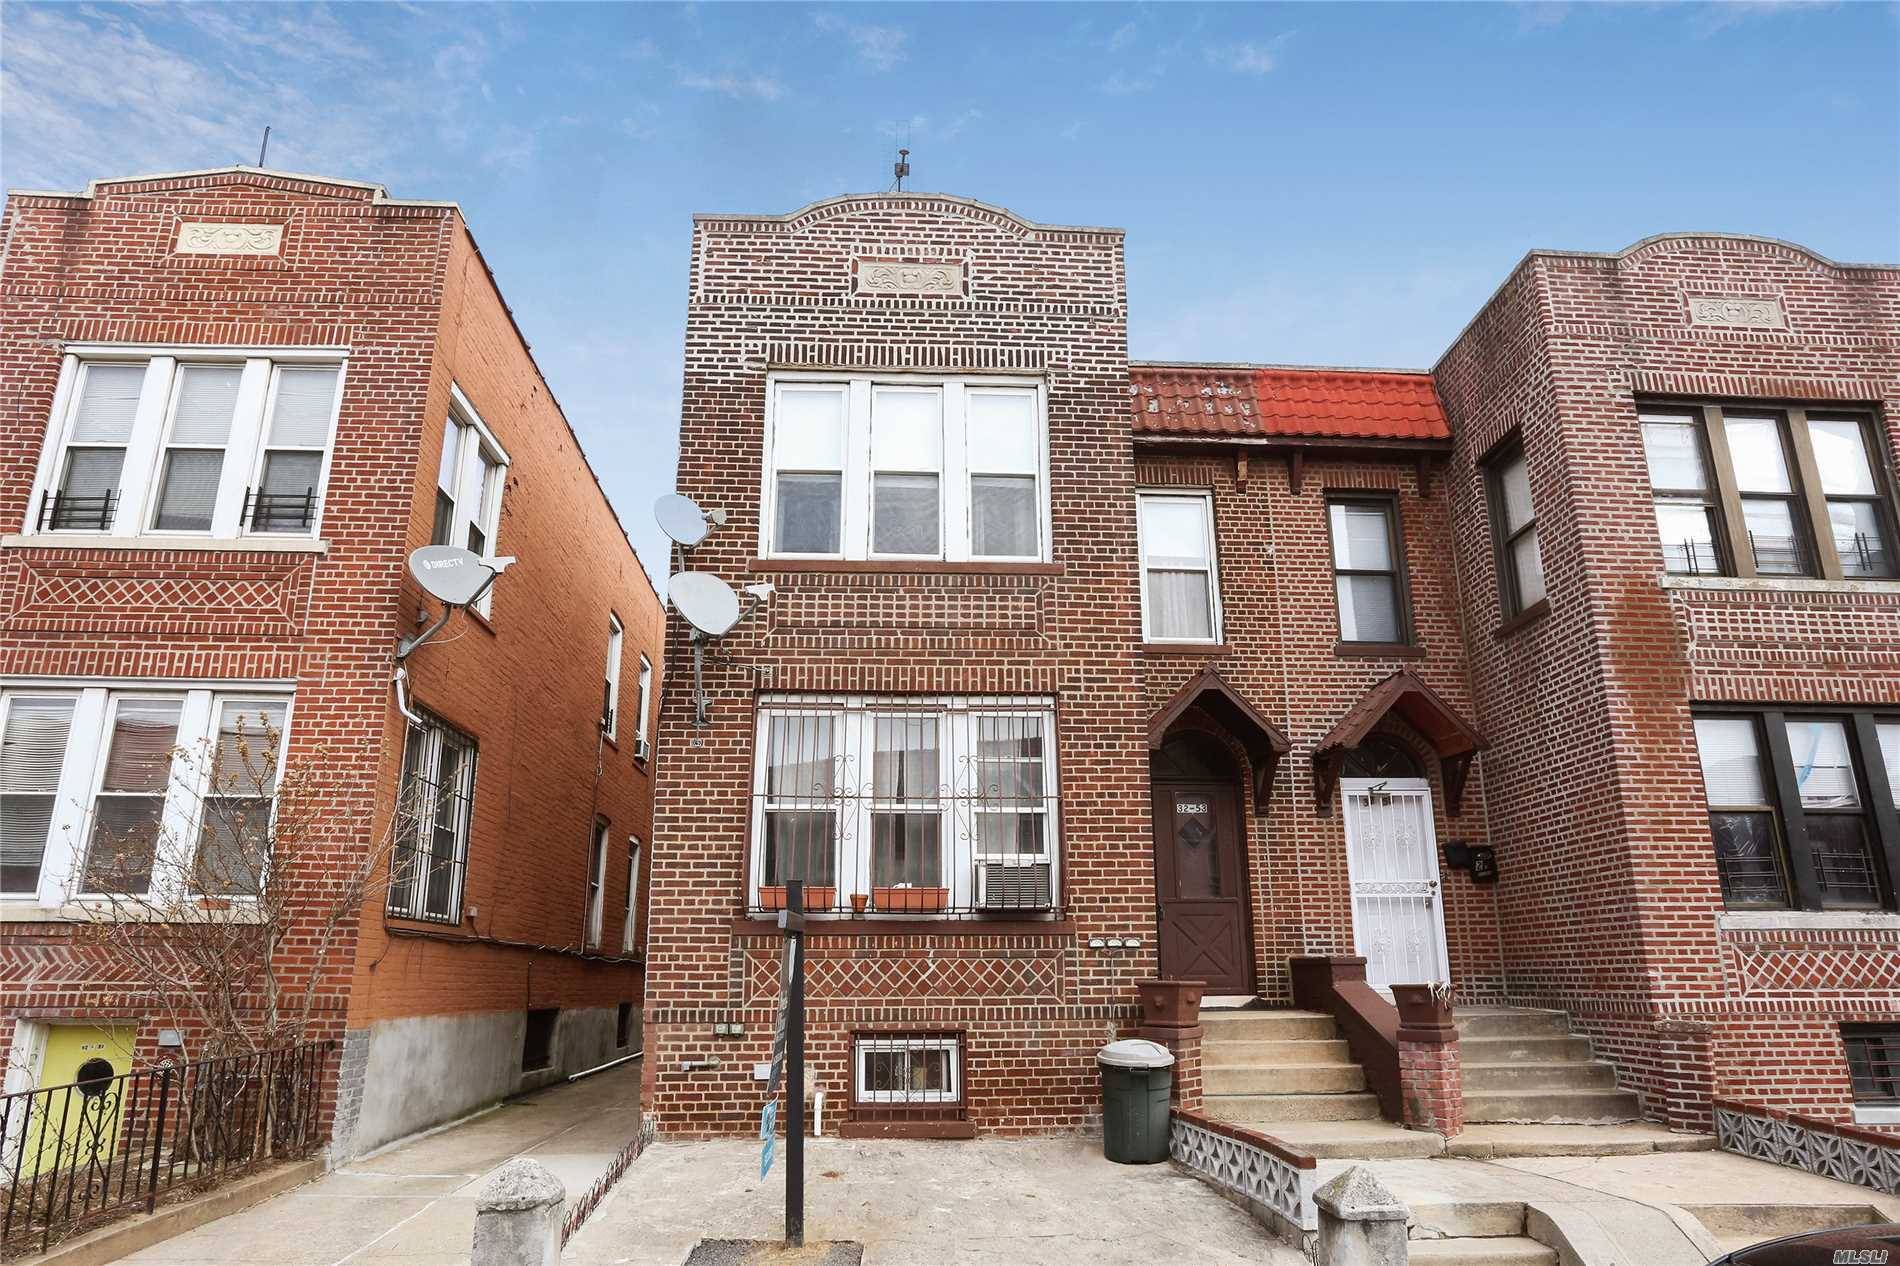 Large Brick 2 Family Home In Great Condition Located In Prime Location Of Jackson Heights.